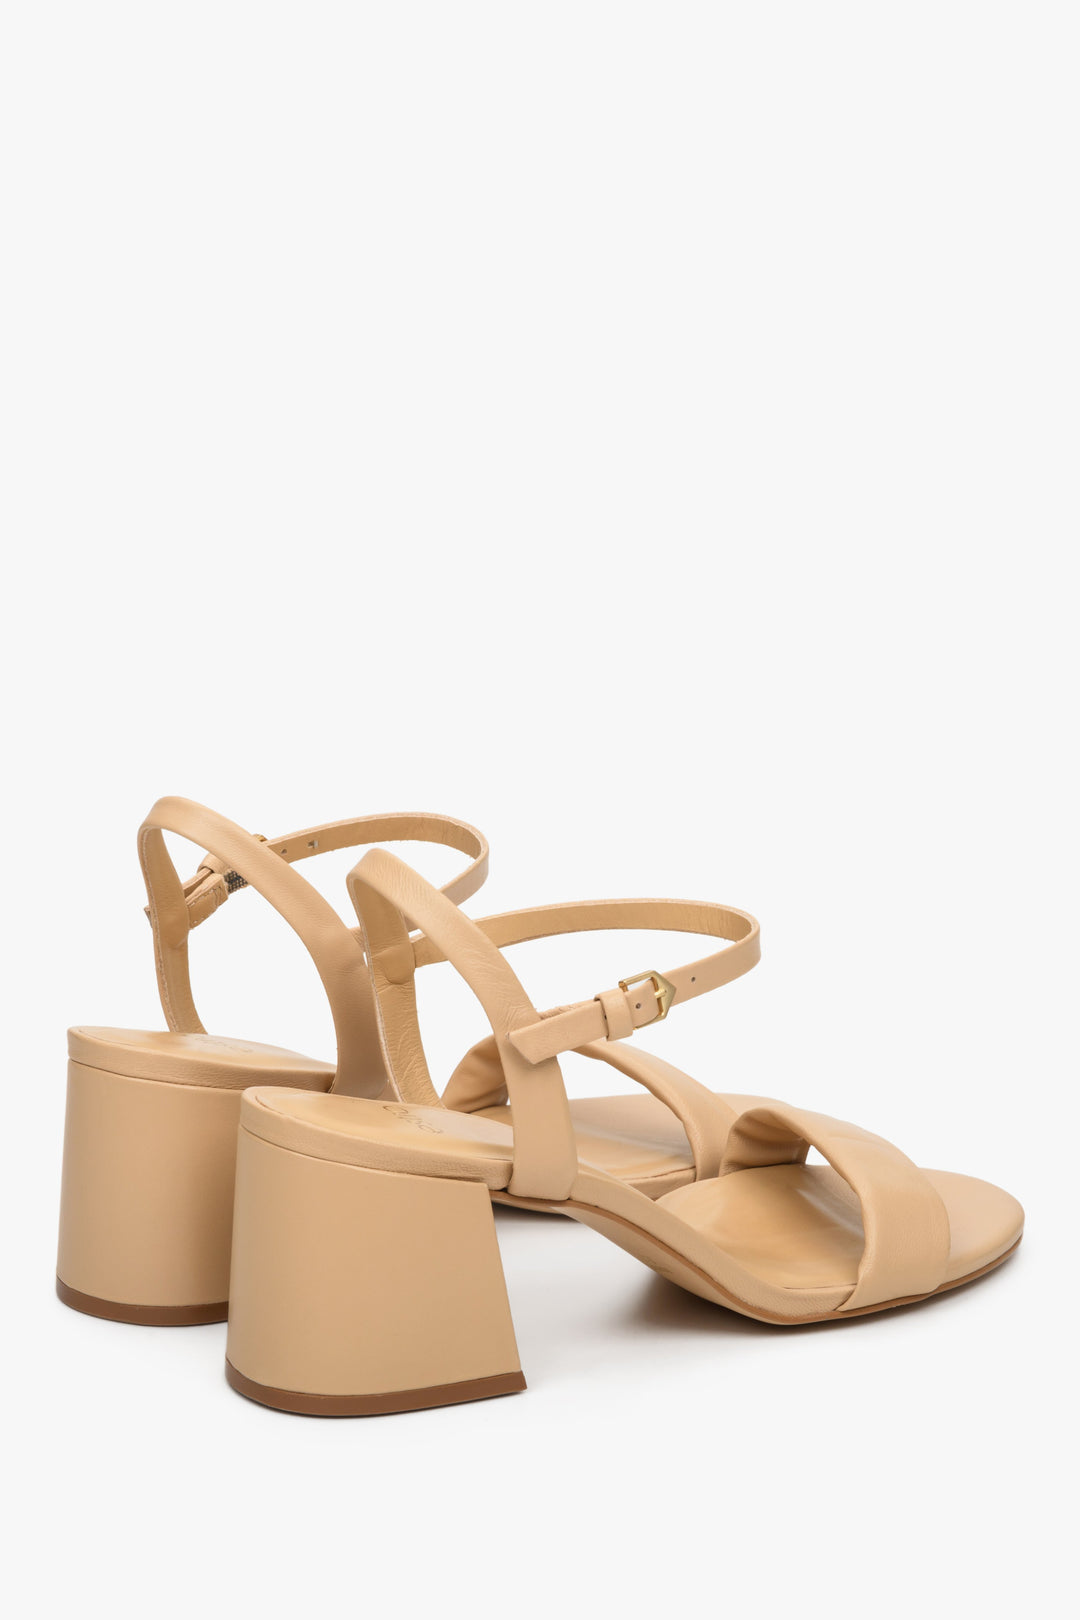 Women's beige Estro sandals made of genuine leather - close-up on the side line of the shoes and the heel.